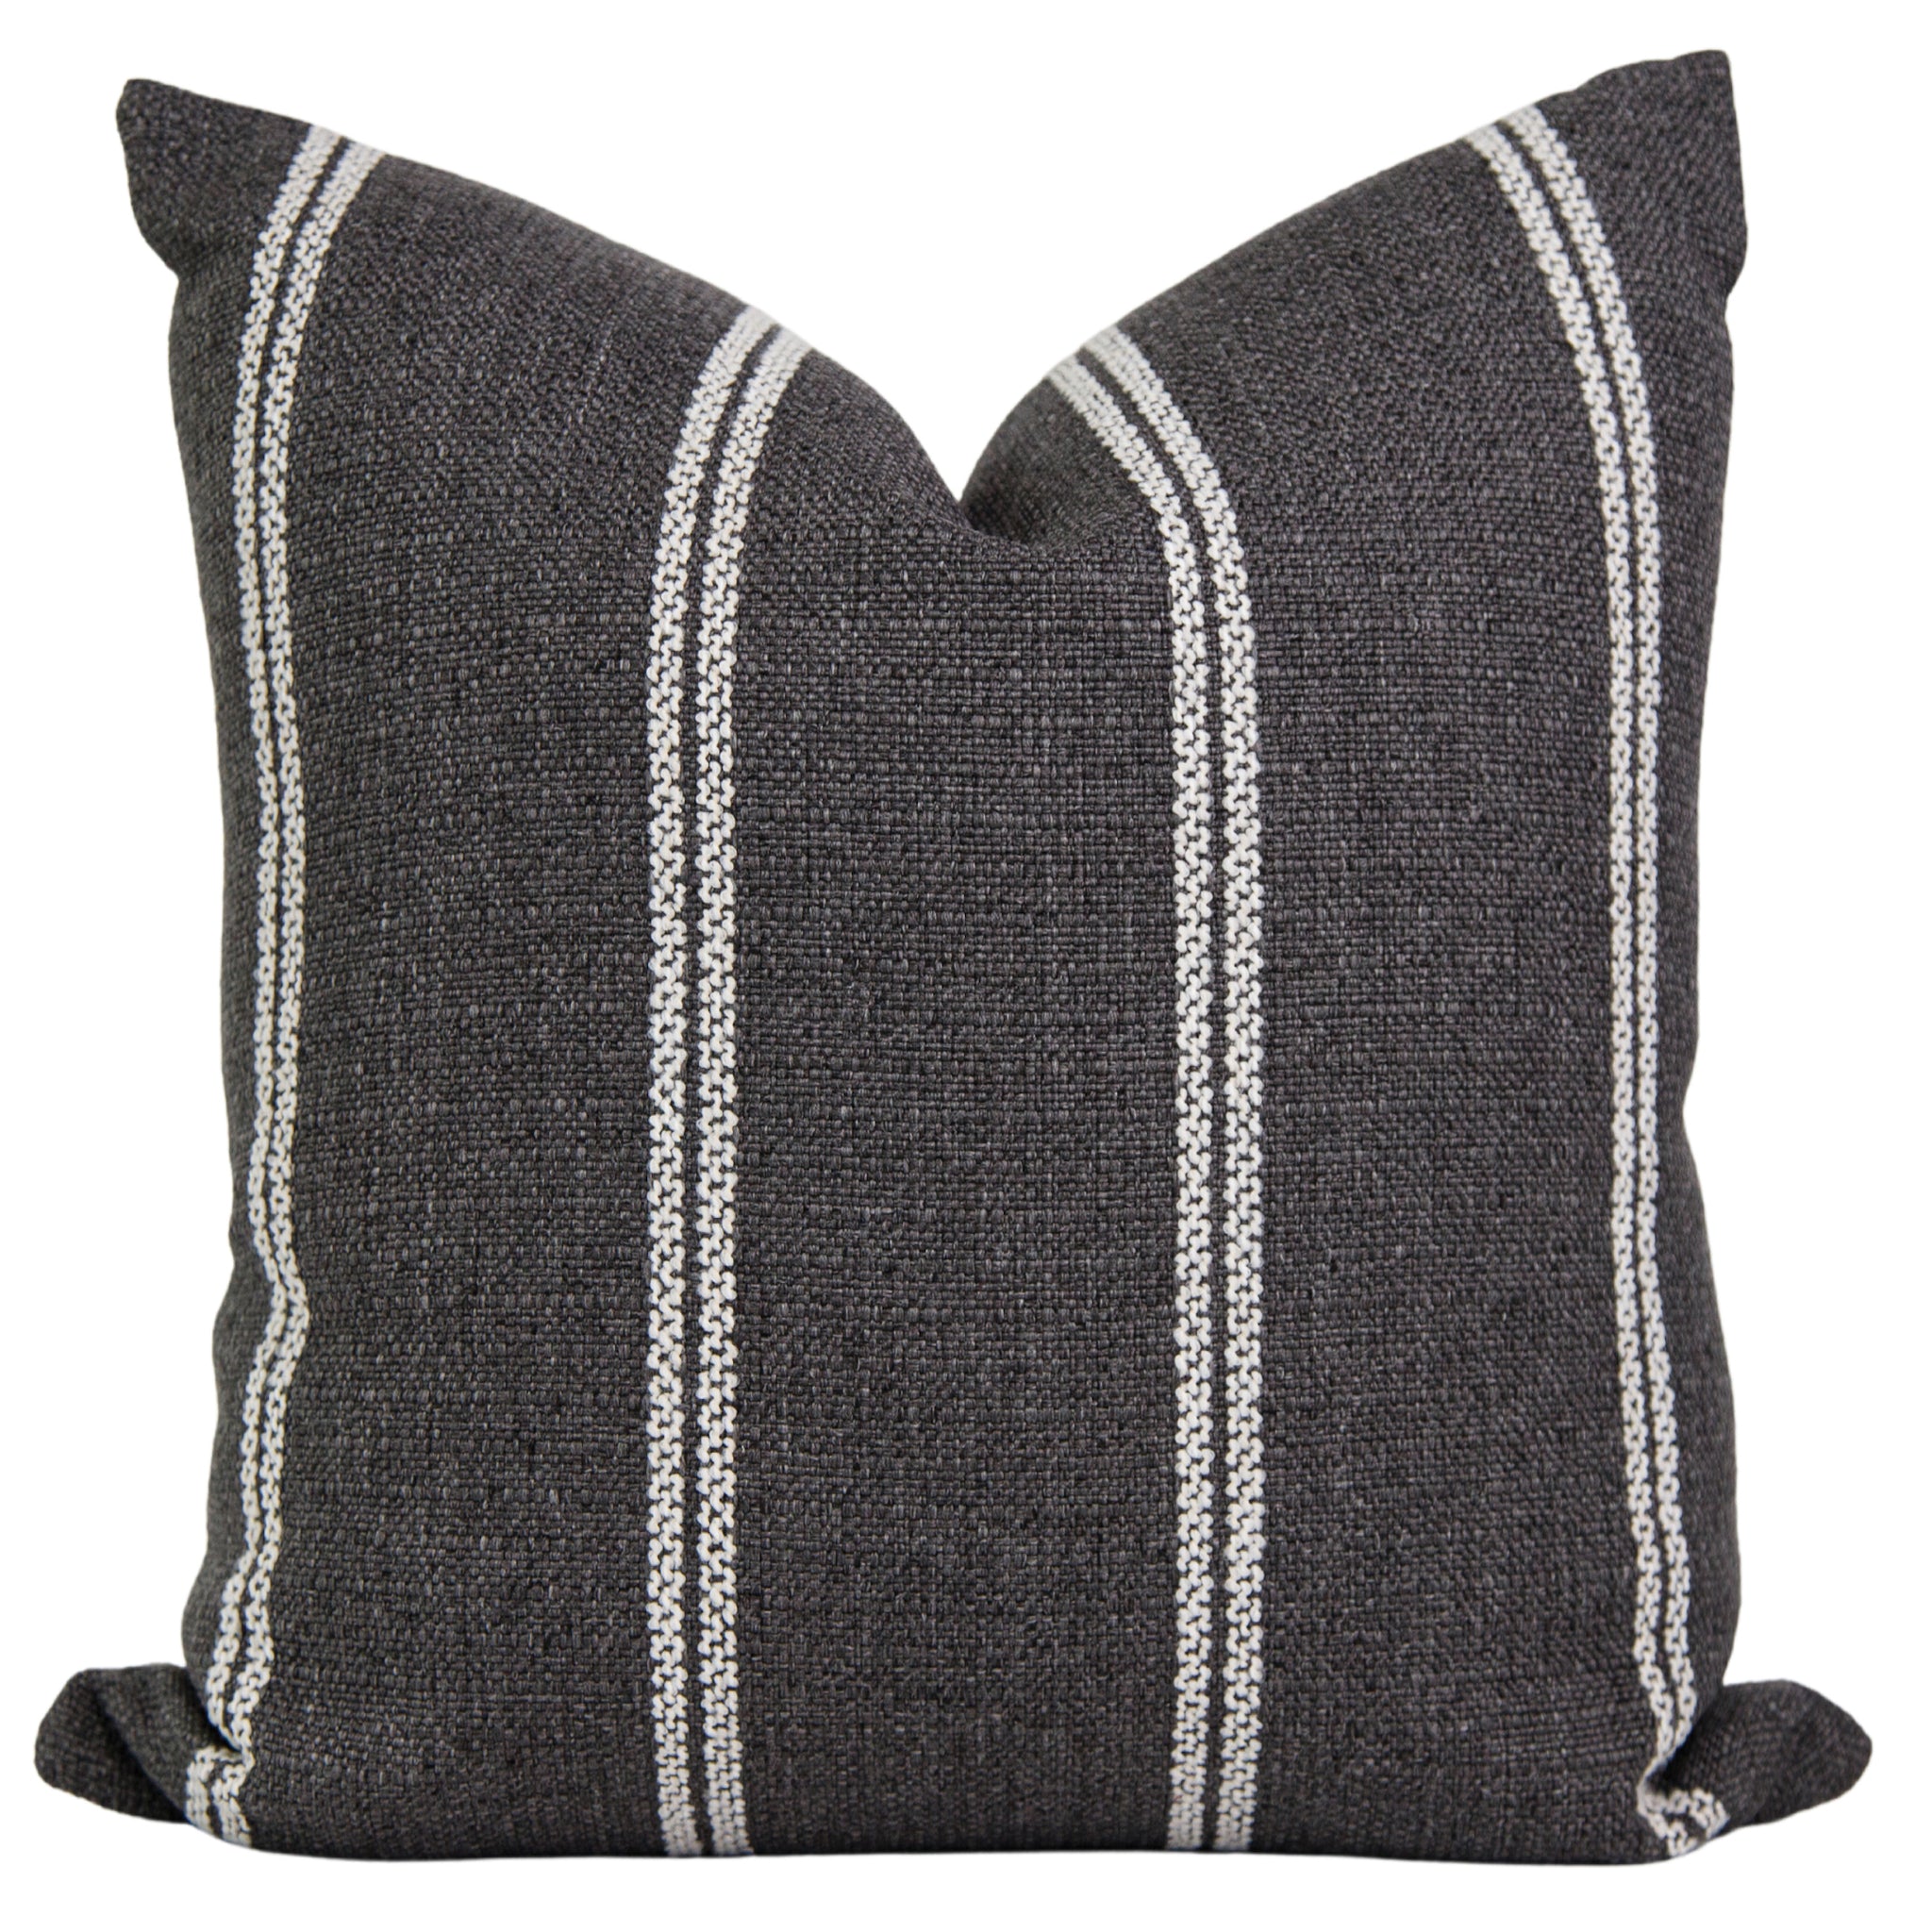 Alexander Home Textured Multi Stripe 13 x 21 Throw Pillow or Pillow Cover Size: Cu003EOnly